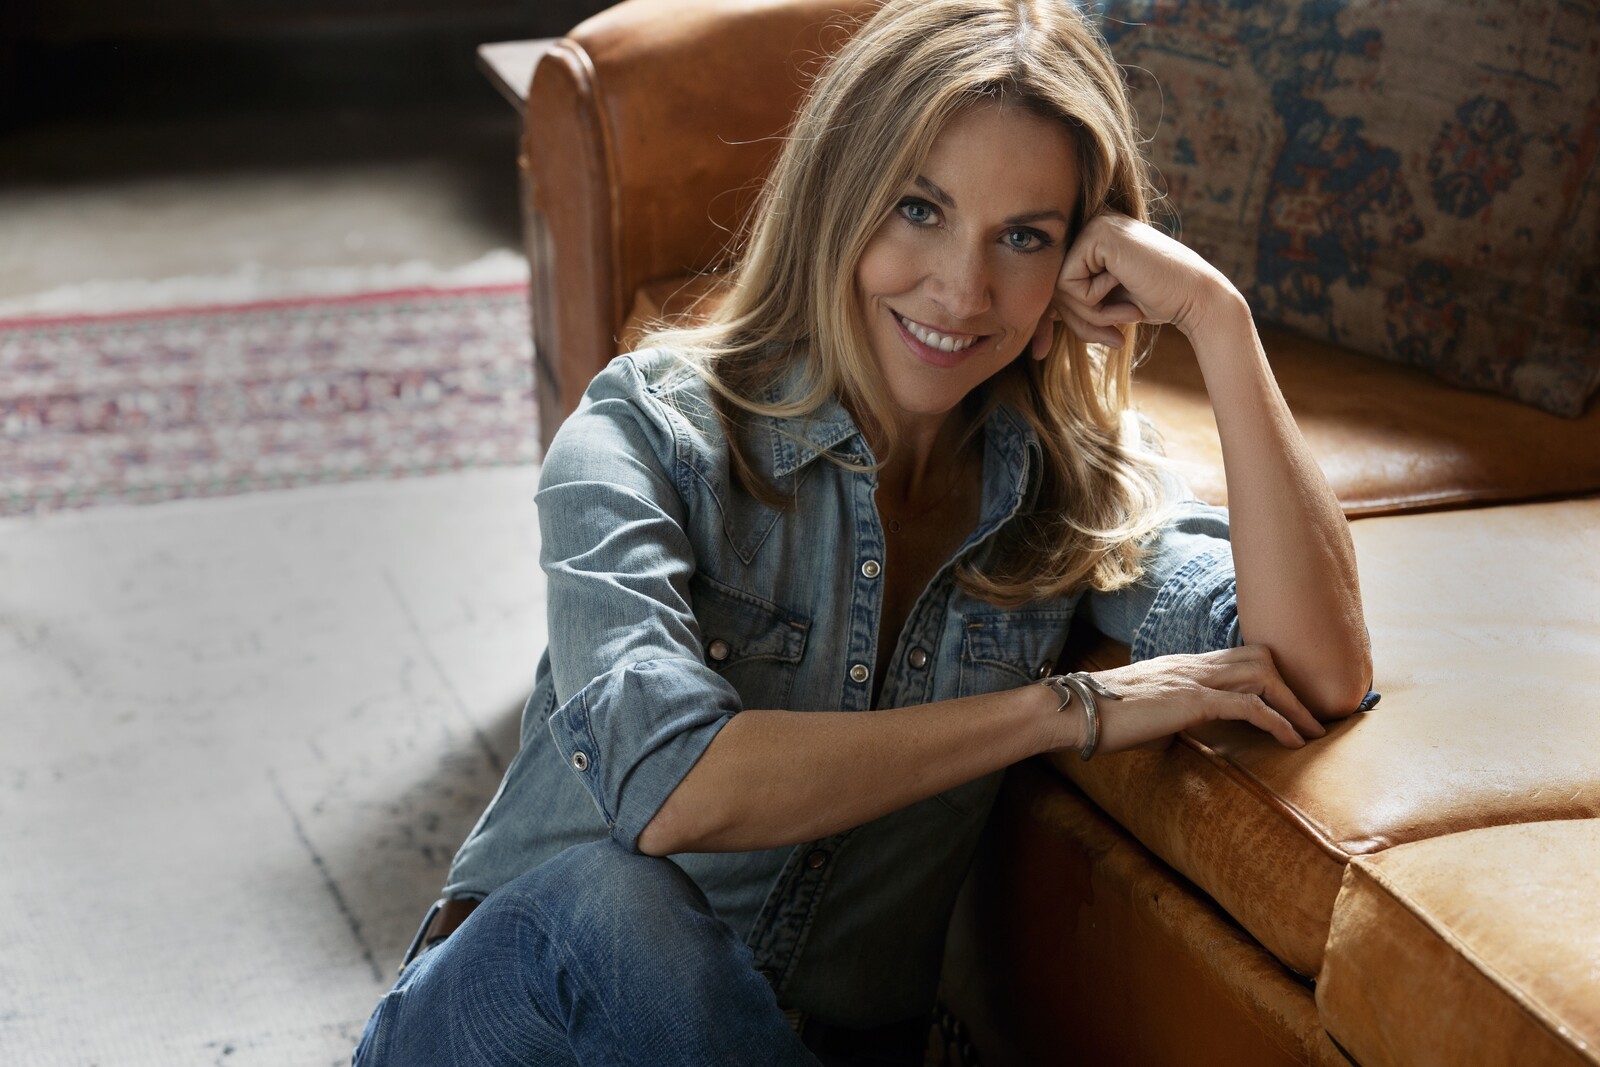 Official press image of recording artist Sheryl Crow